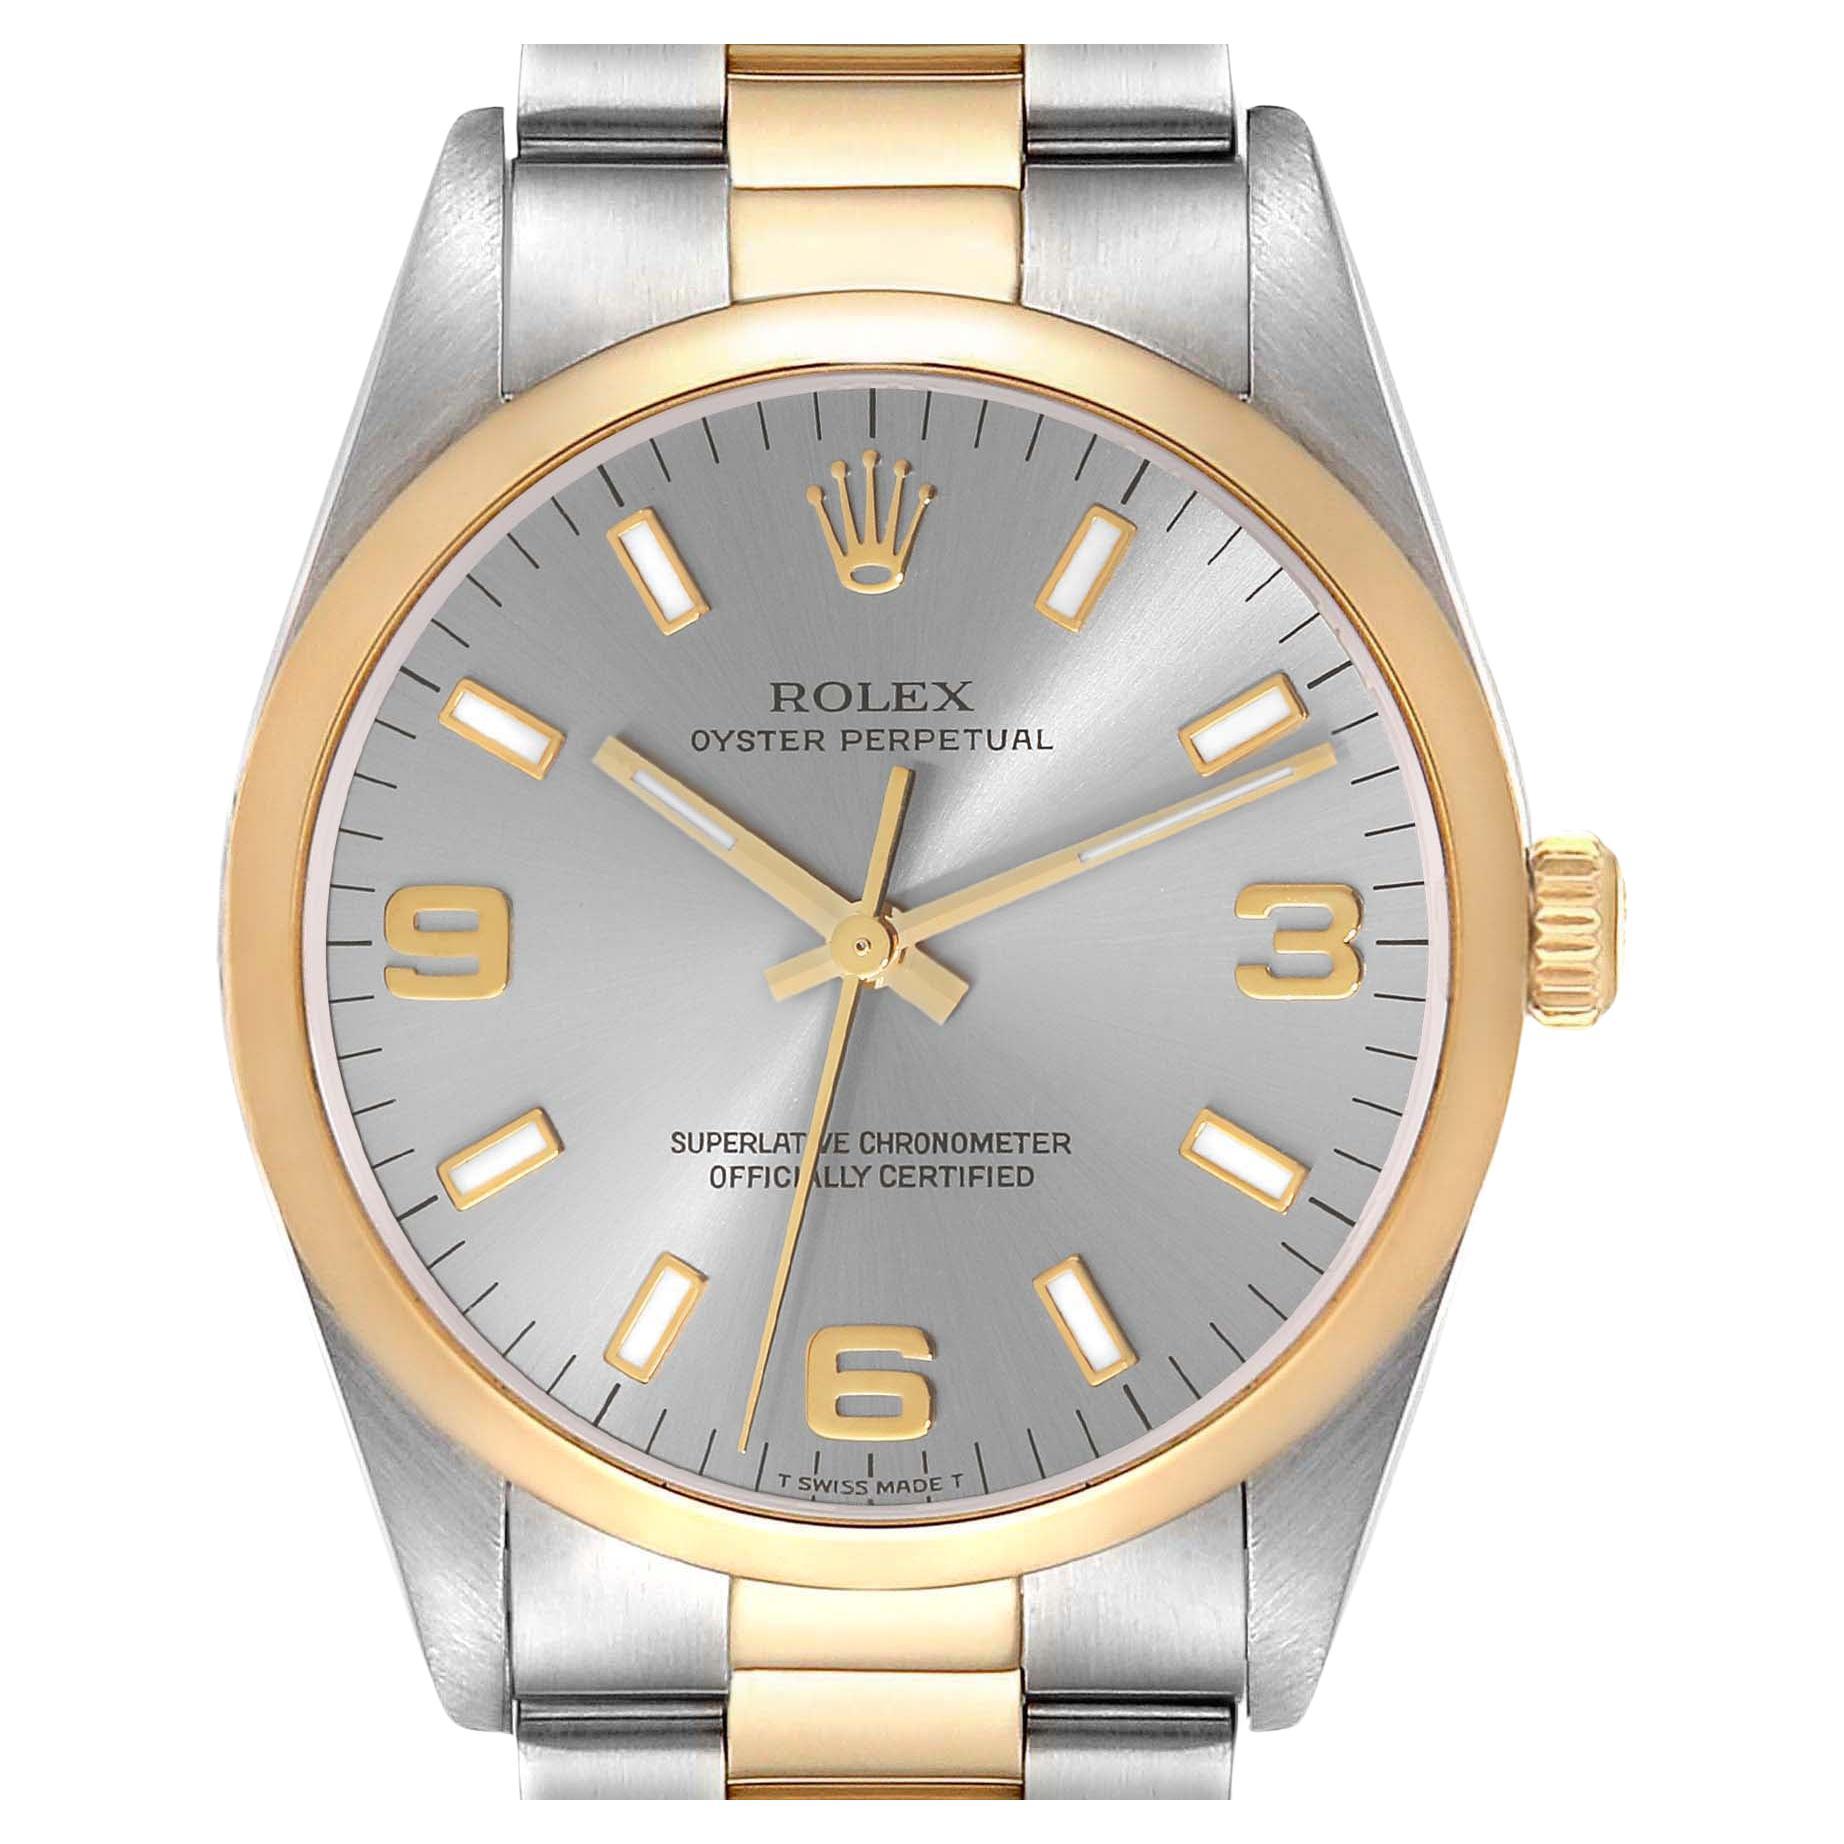 Rolex Oyster Perpetual Steel Yellow Gold Slate Dial Mens Watch 14203